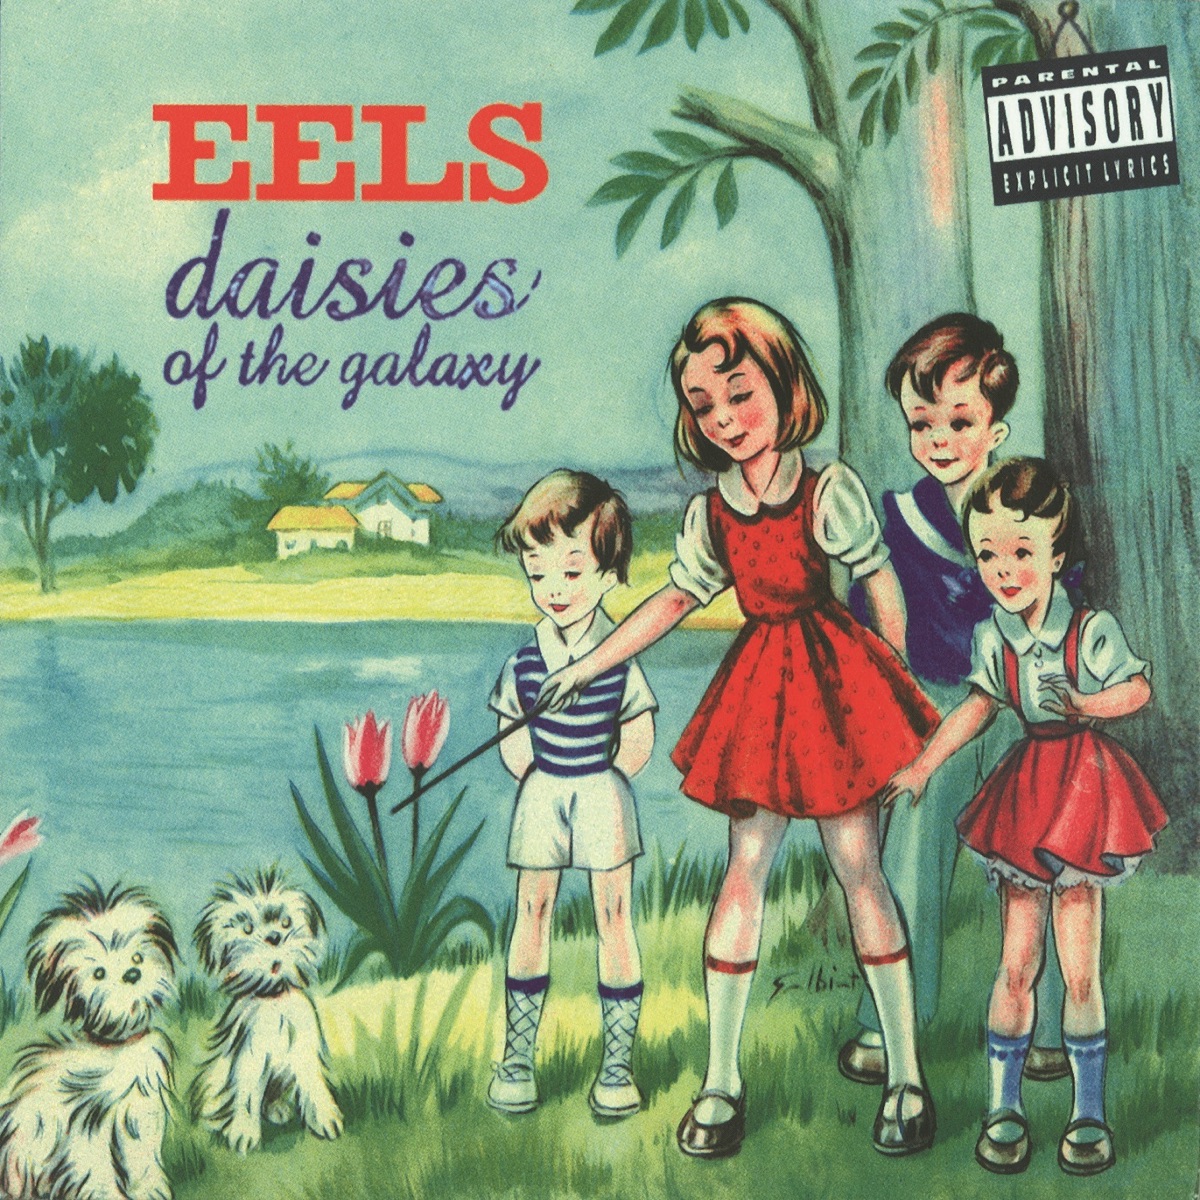 Mistakes of My Youth - song and lyrics by Eels